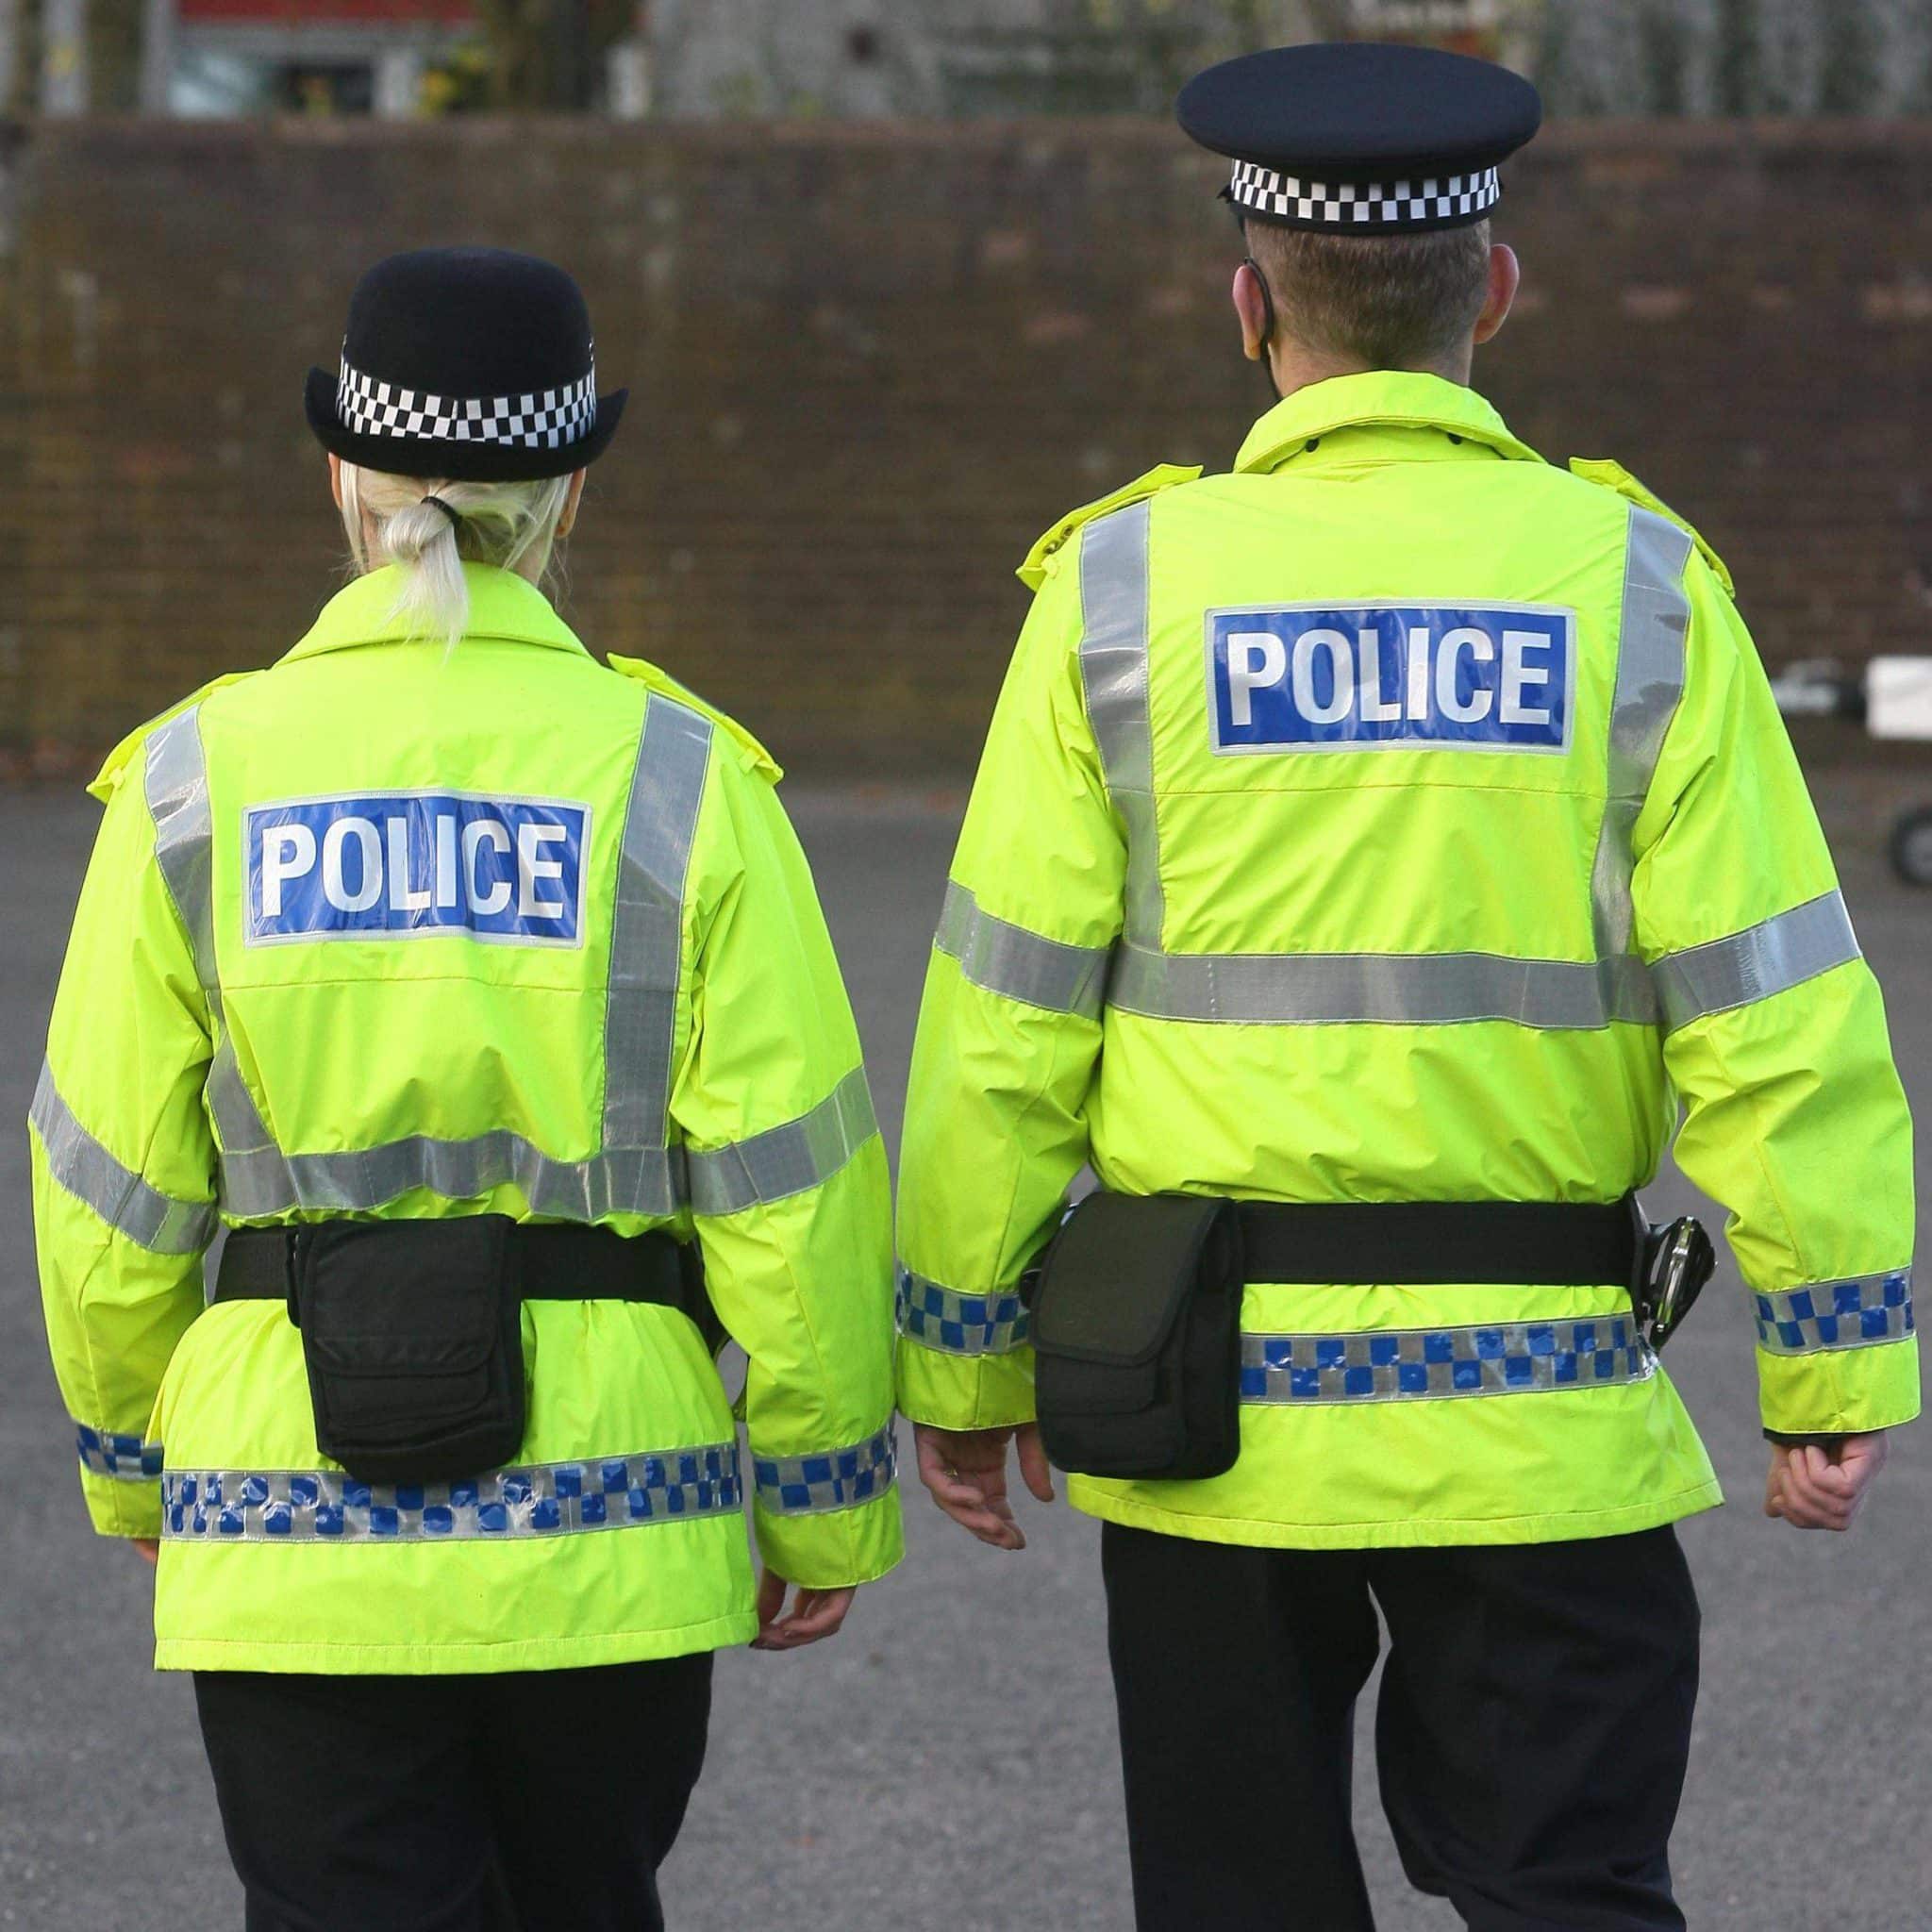 Police accused for the second time of failing to record all crimes including rape